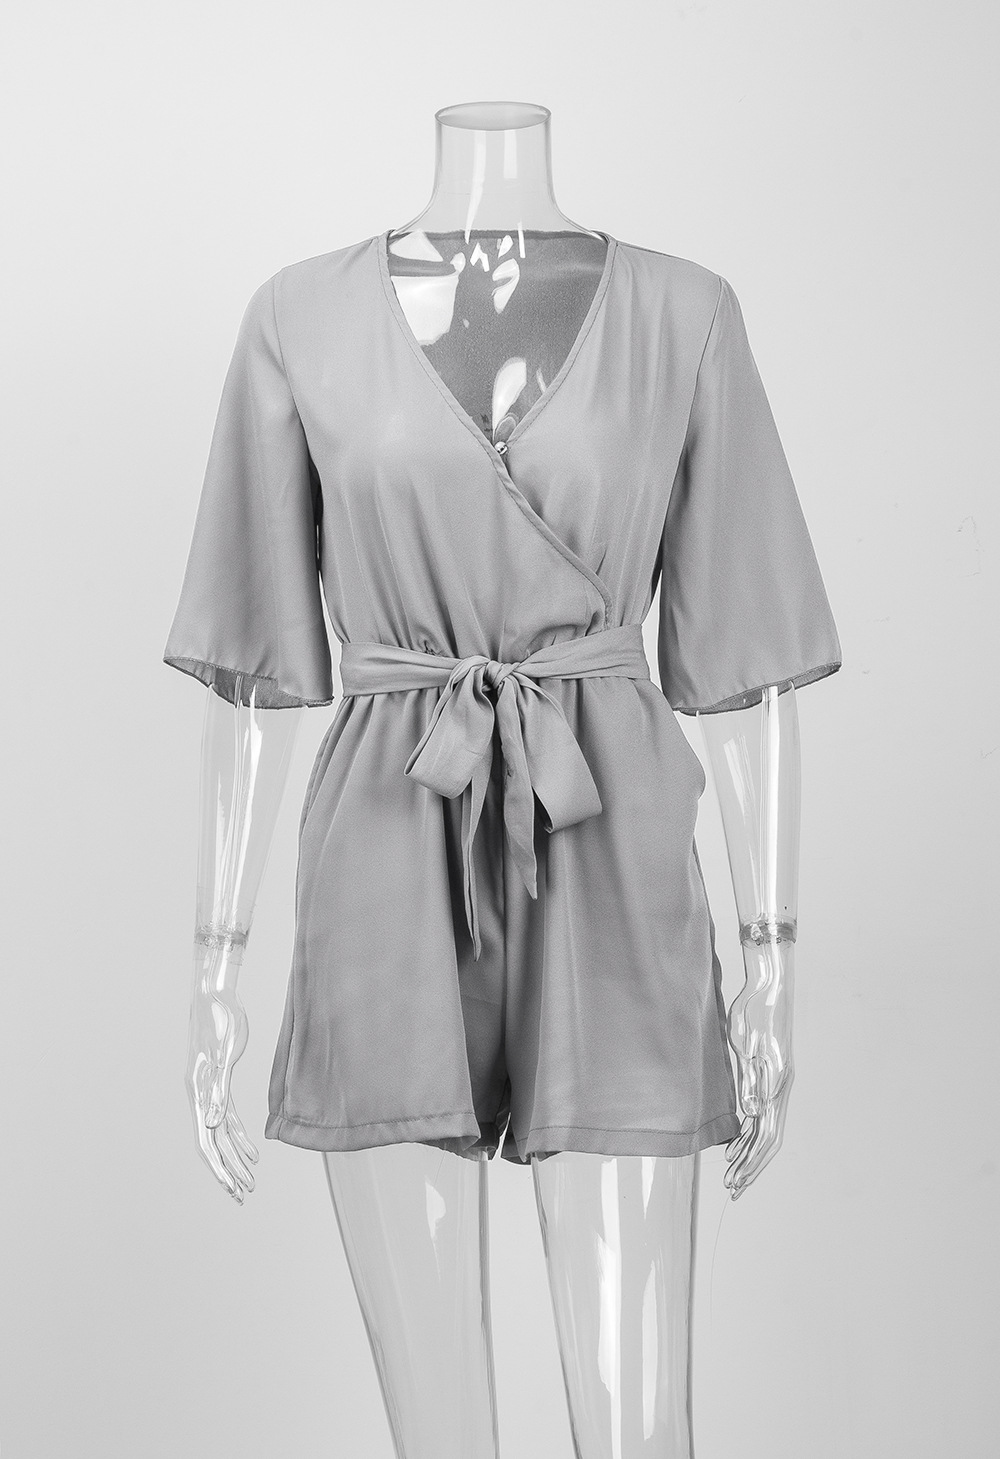 Grey Chiffon Plunge V Half Sleeves Romper Featuring Bow Accent Tie Belt 